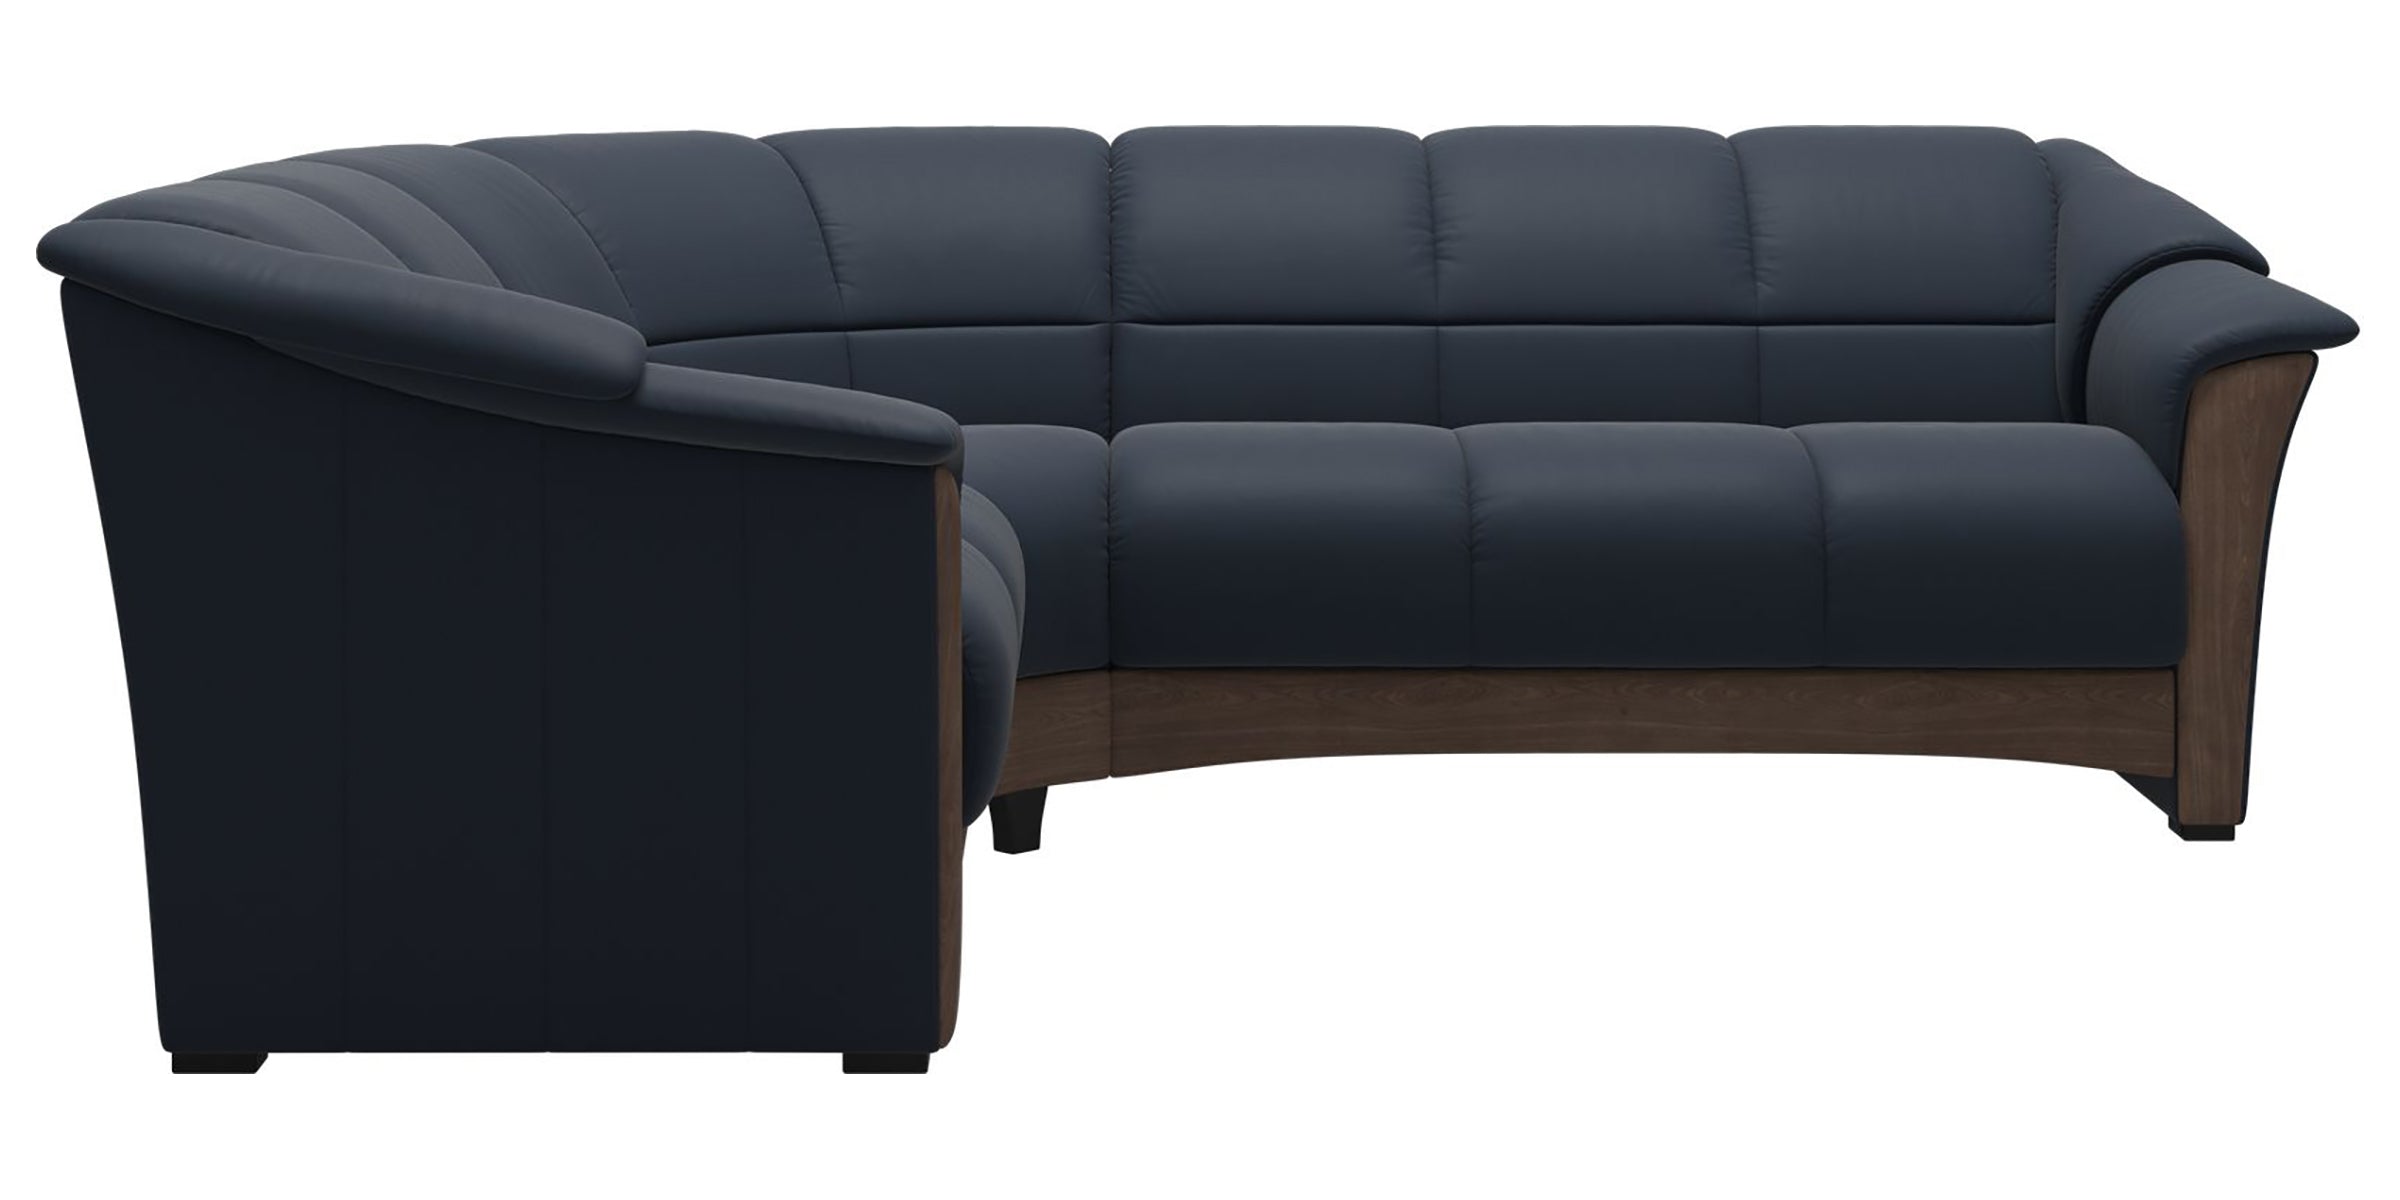 Paloma Leather Oxford Blue and Walnut Base | Stressless Oslo Sectional | Valley Ridge Furniture